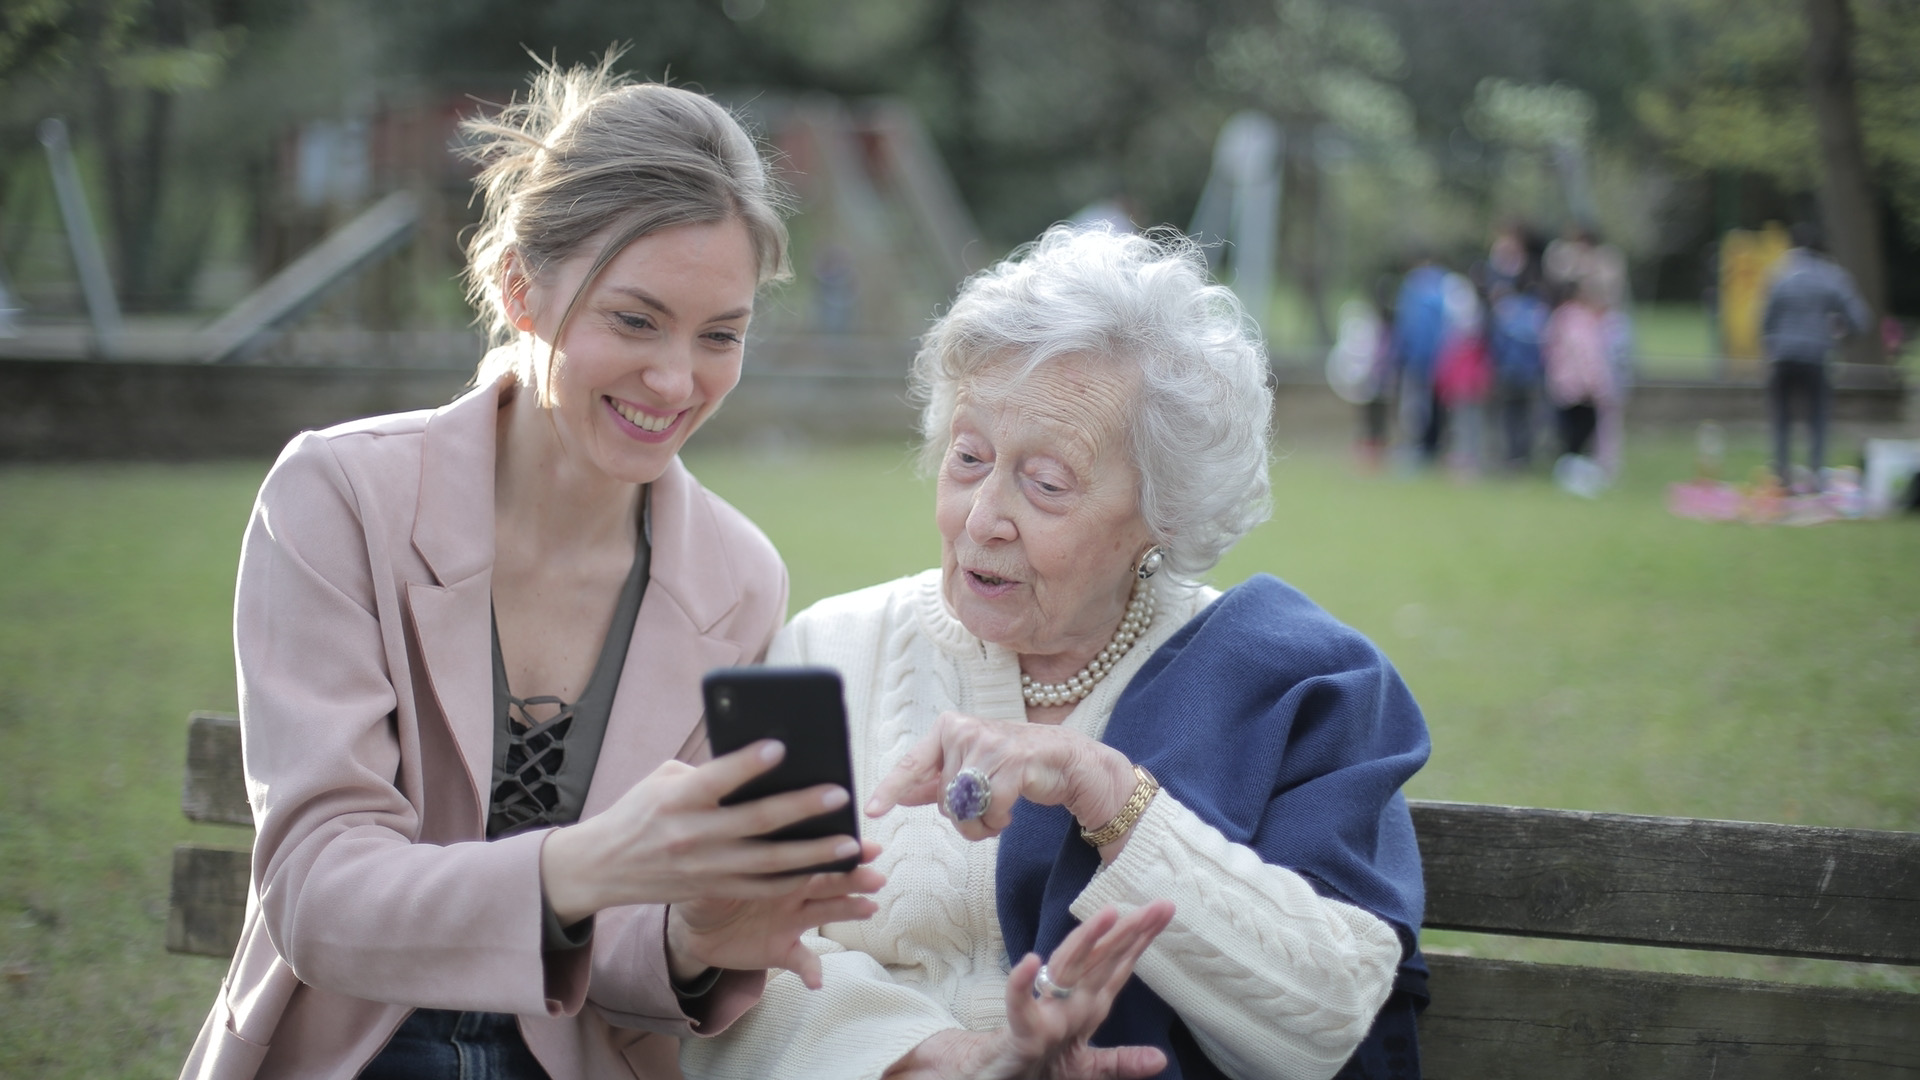 A park background where A young female with a phone showing it to an older woman